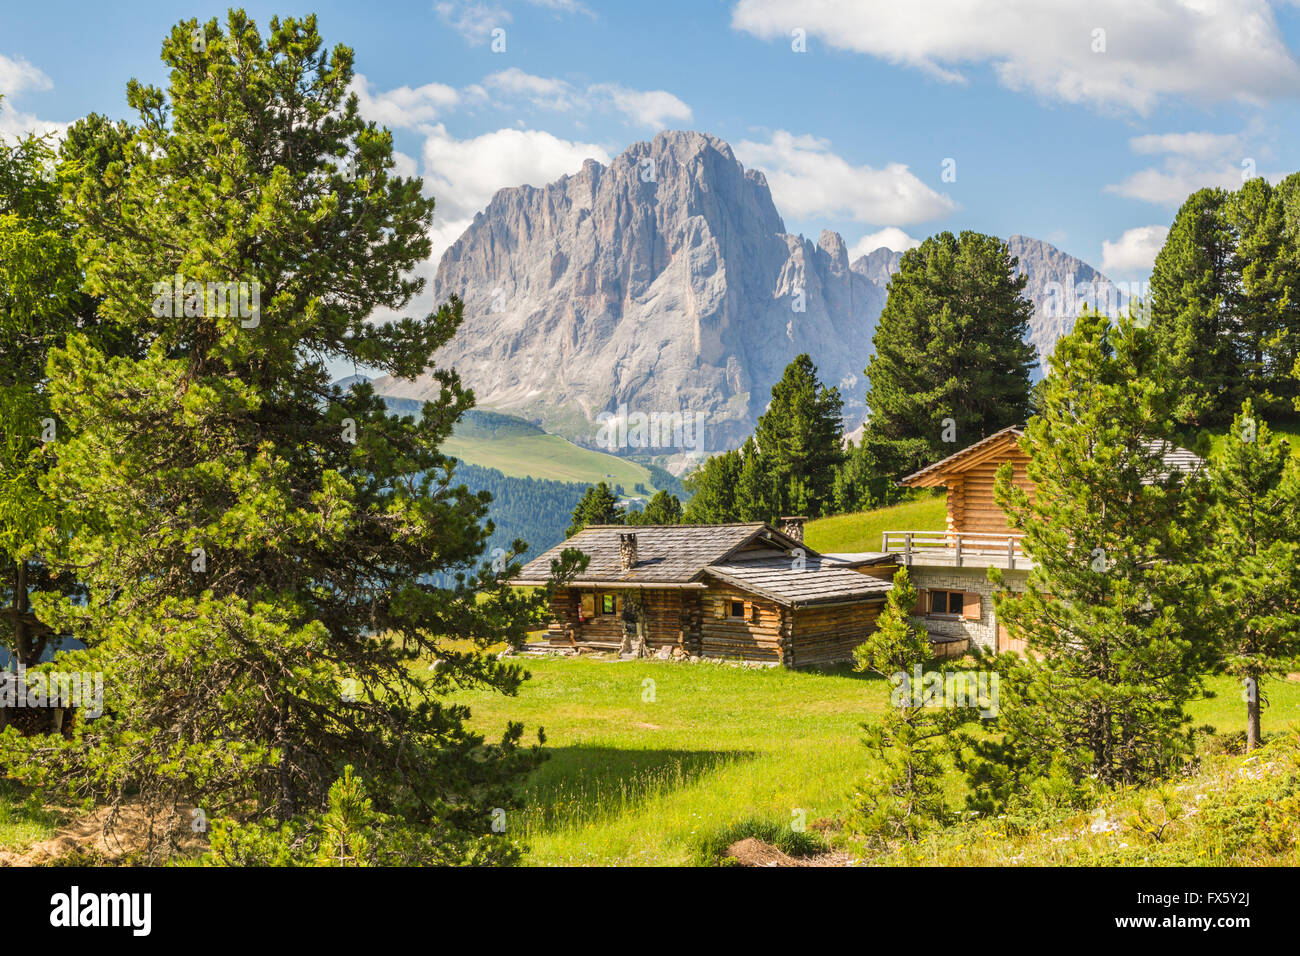 View over the Dolomites from Col Raiser, with a cabin, with spruce trees around, Selva, Val Gardena, Italy Stock Photo